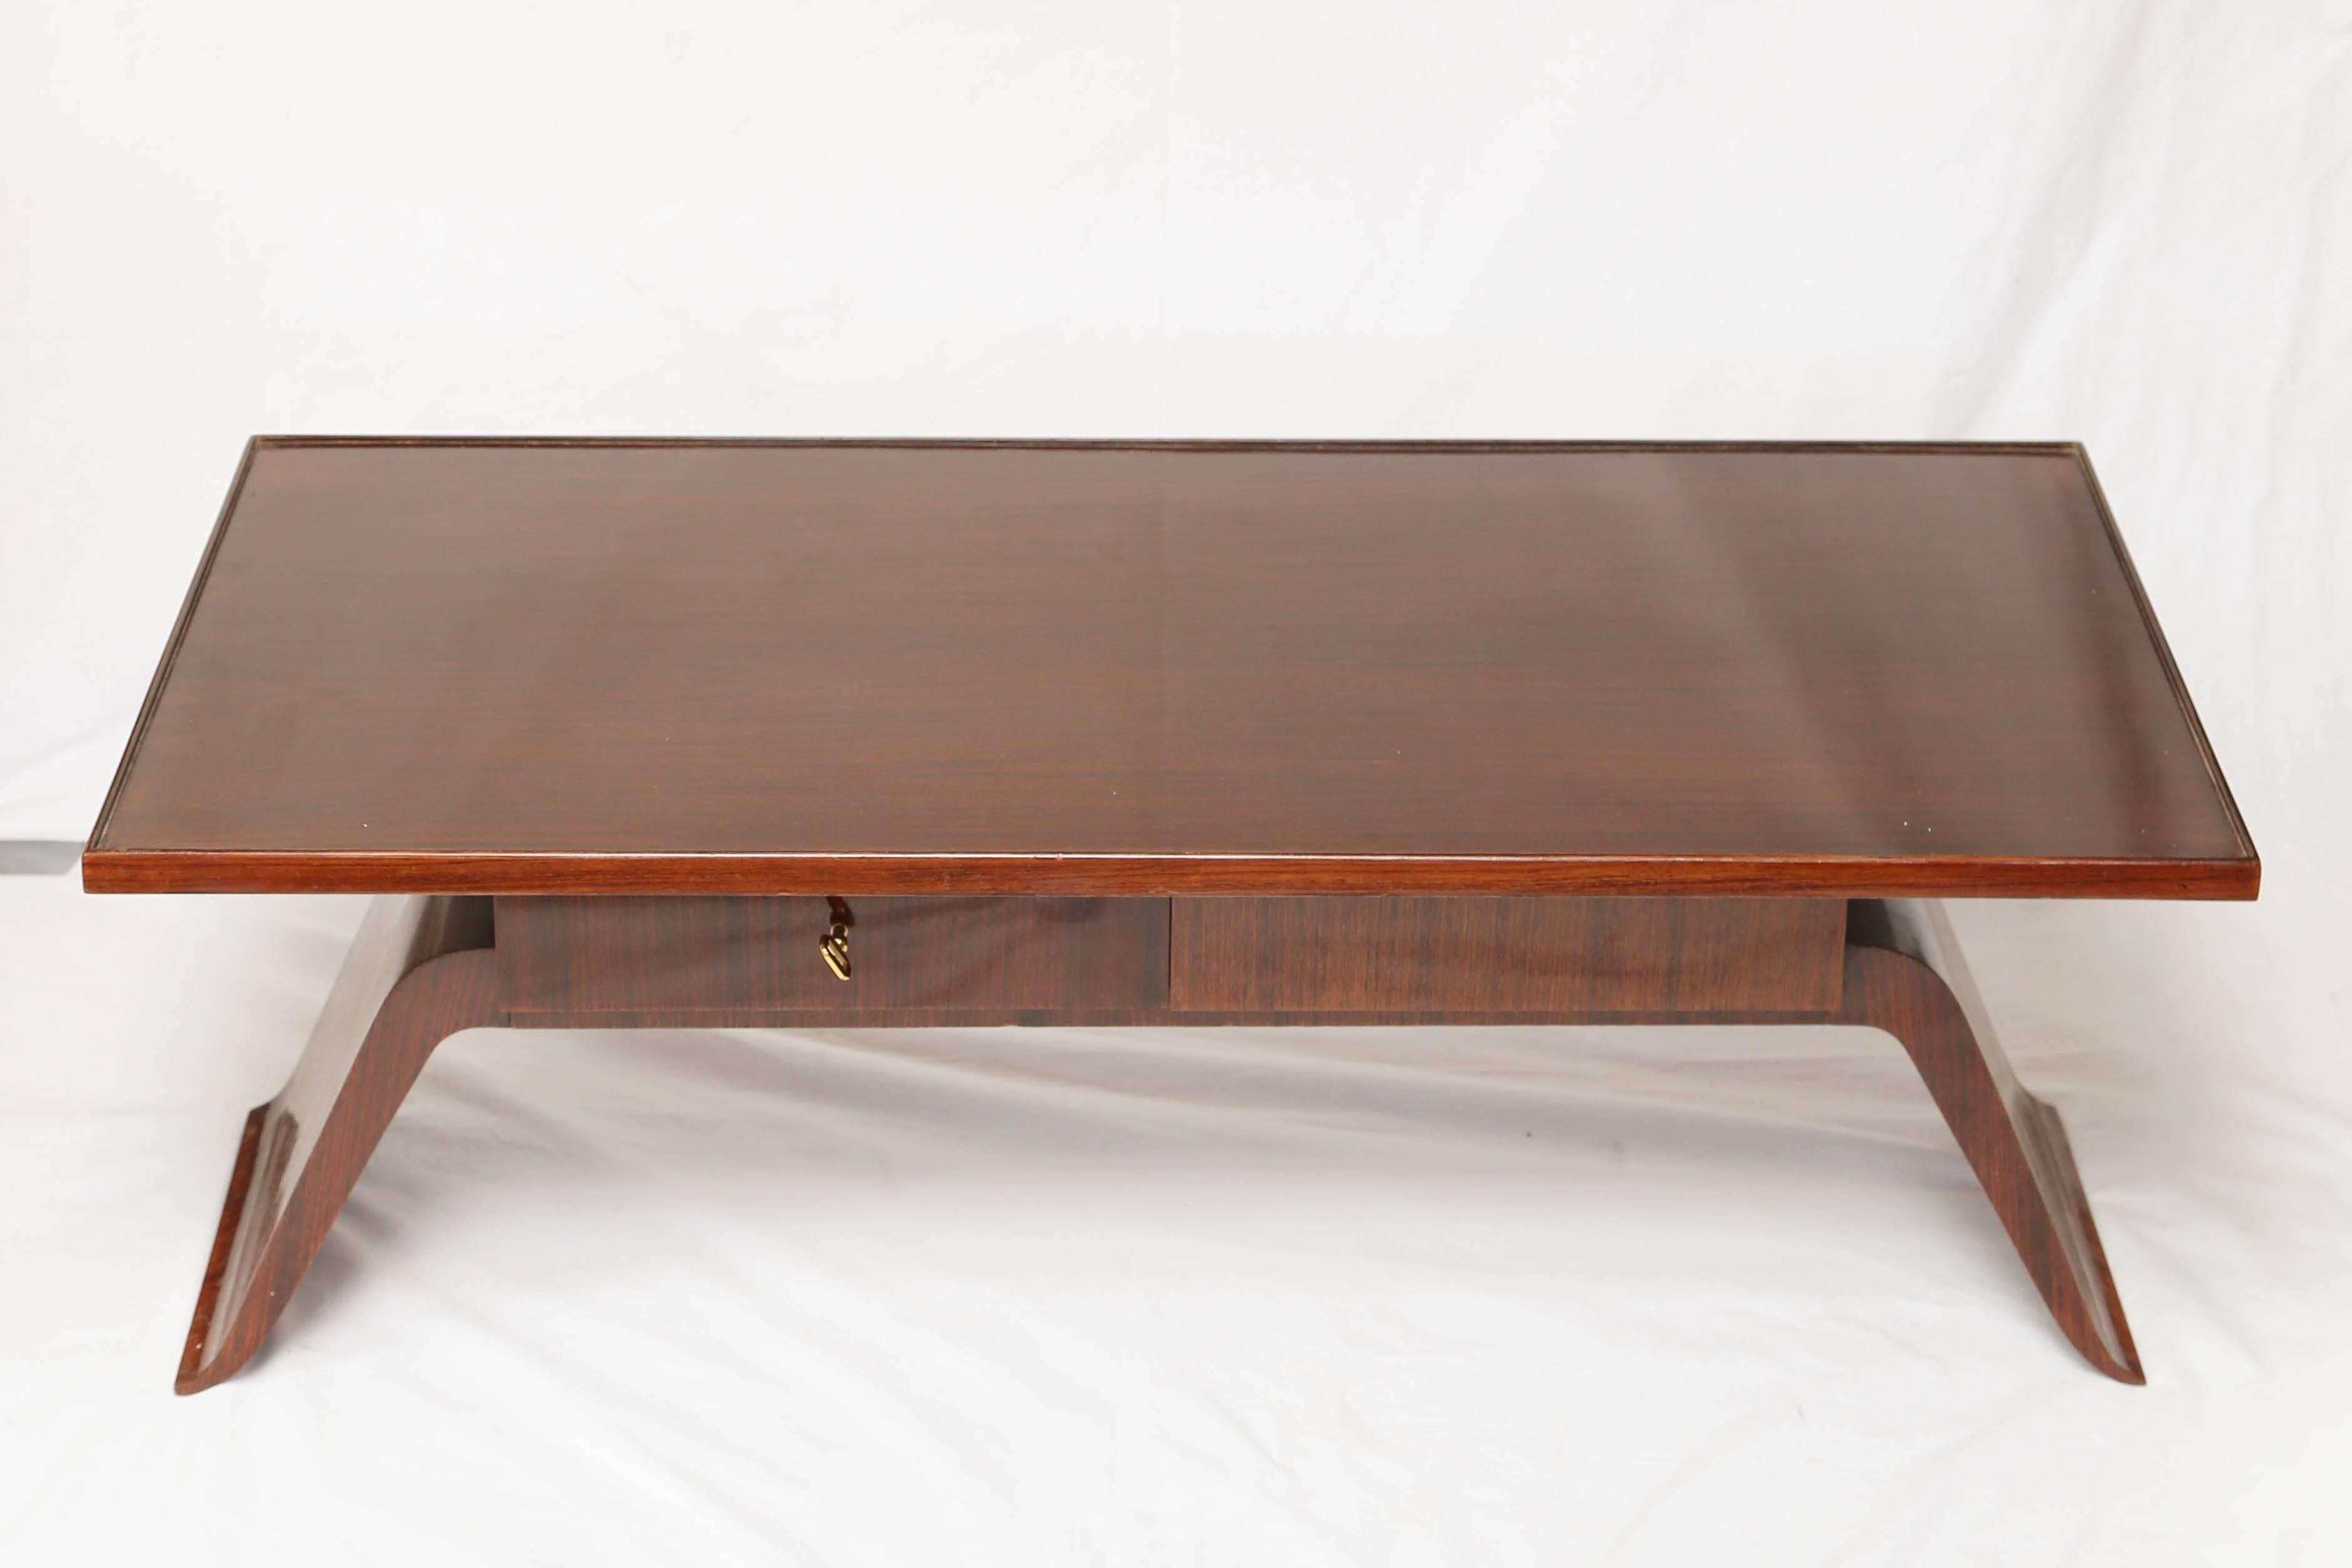 A beautiful and sophisticate rosewood partner coffee table with one drawers on each sides with key.